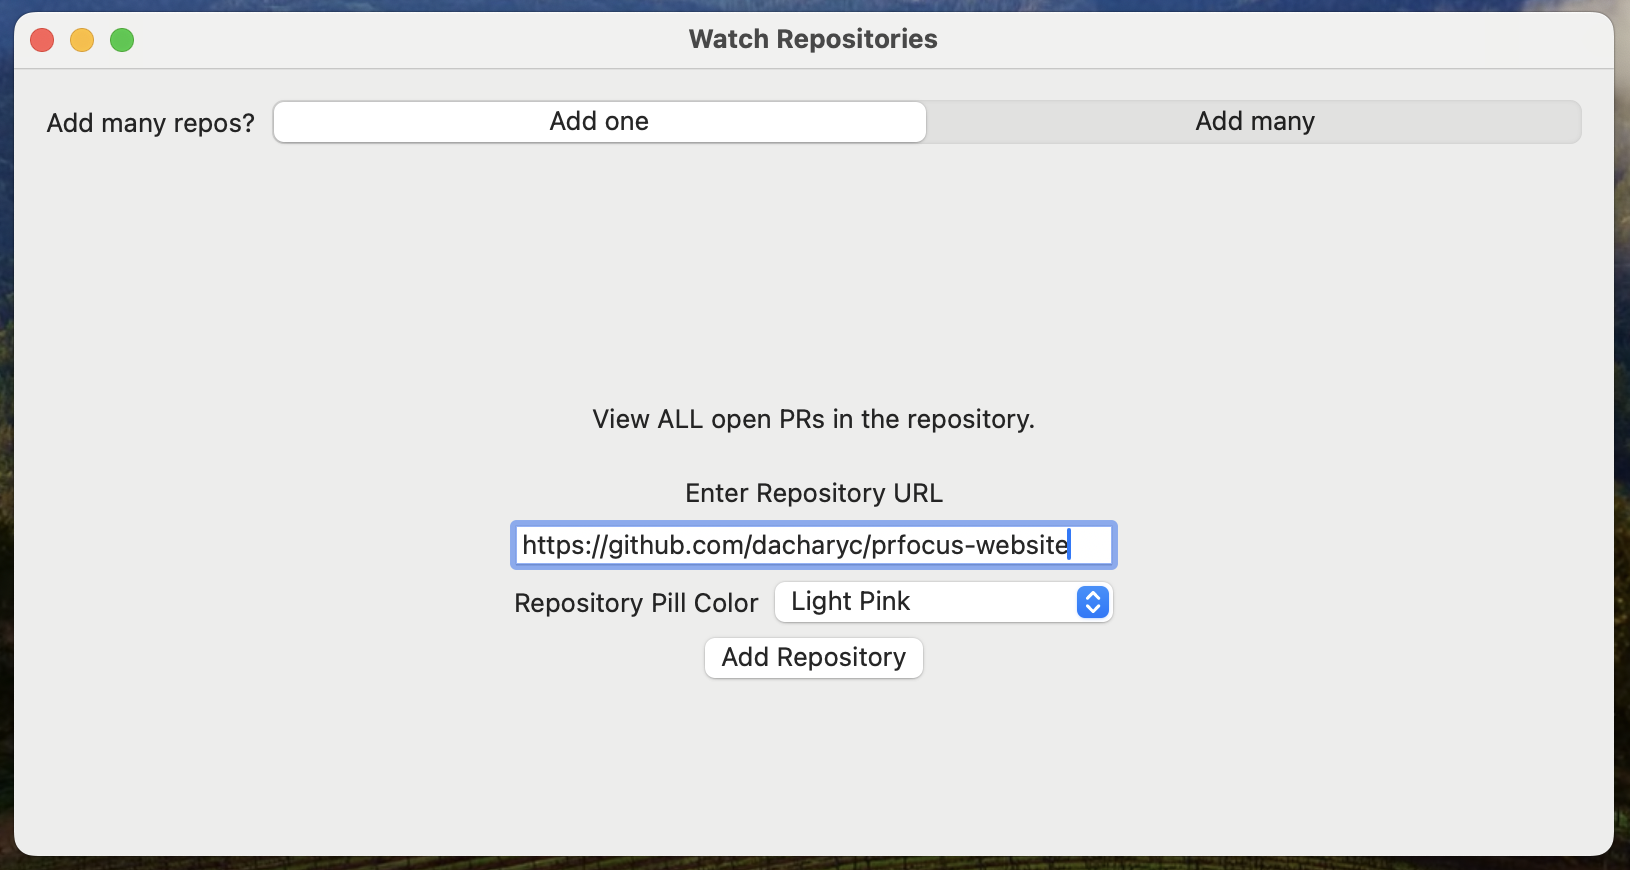 Screenshot showing the “Add one” option in the “Watch Repository” pane, with a text field to enter a URL, a picker to select a color and a save buttons